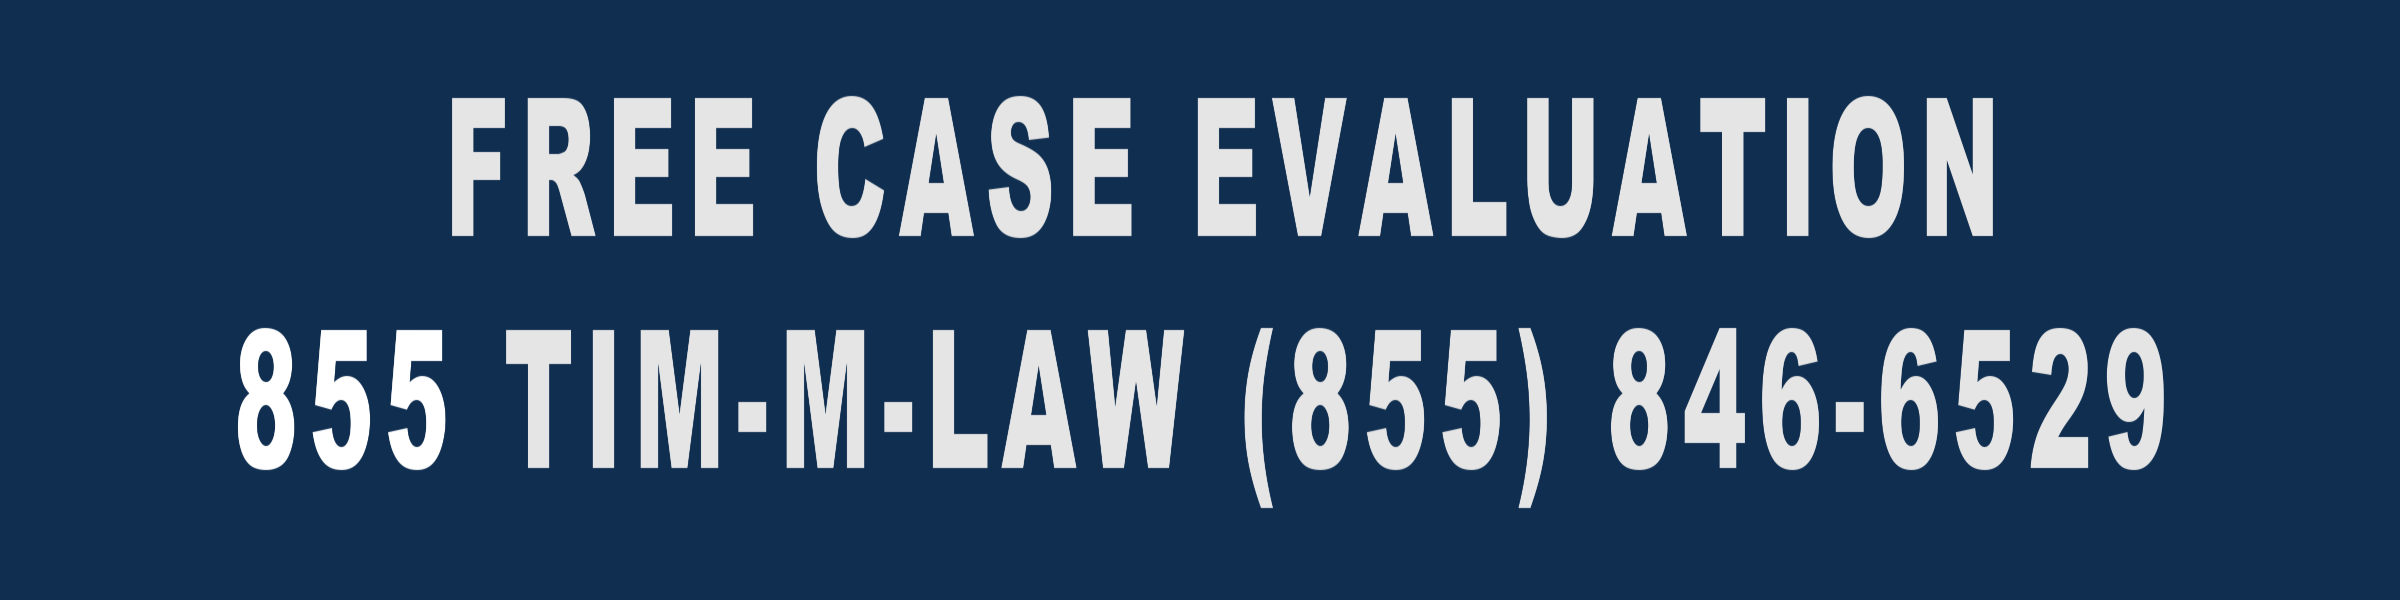 Attorney advertisement to call for free case evaluation, blue background with white foreground